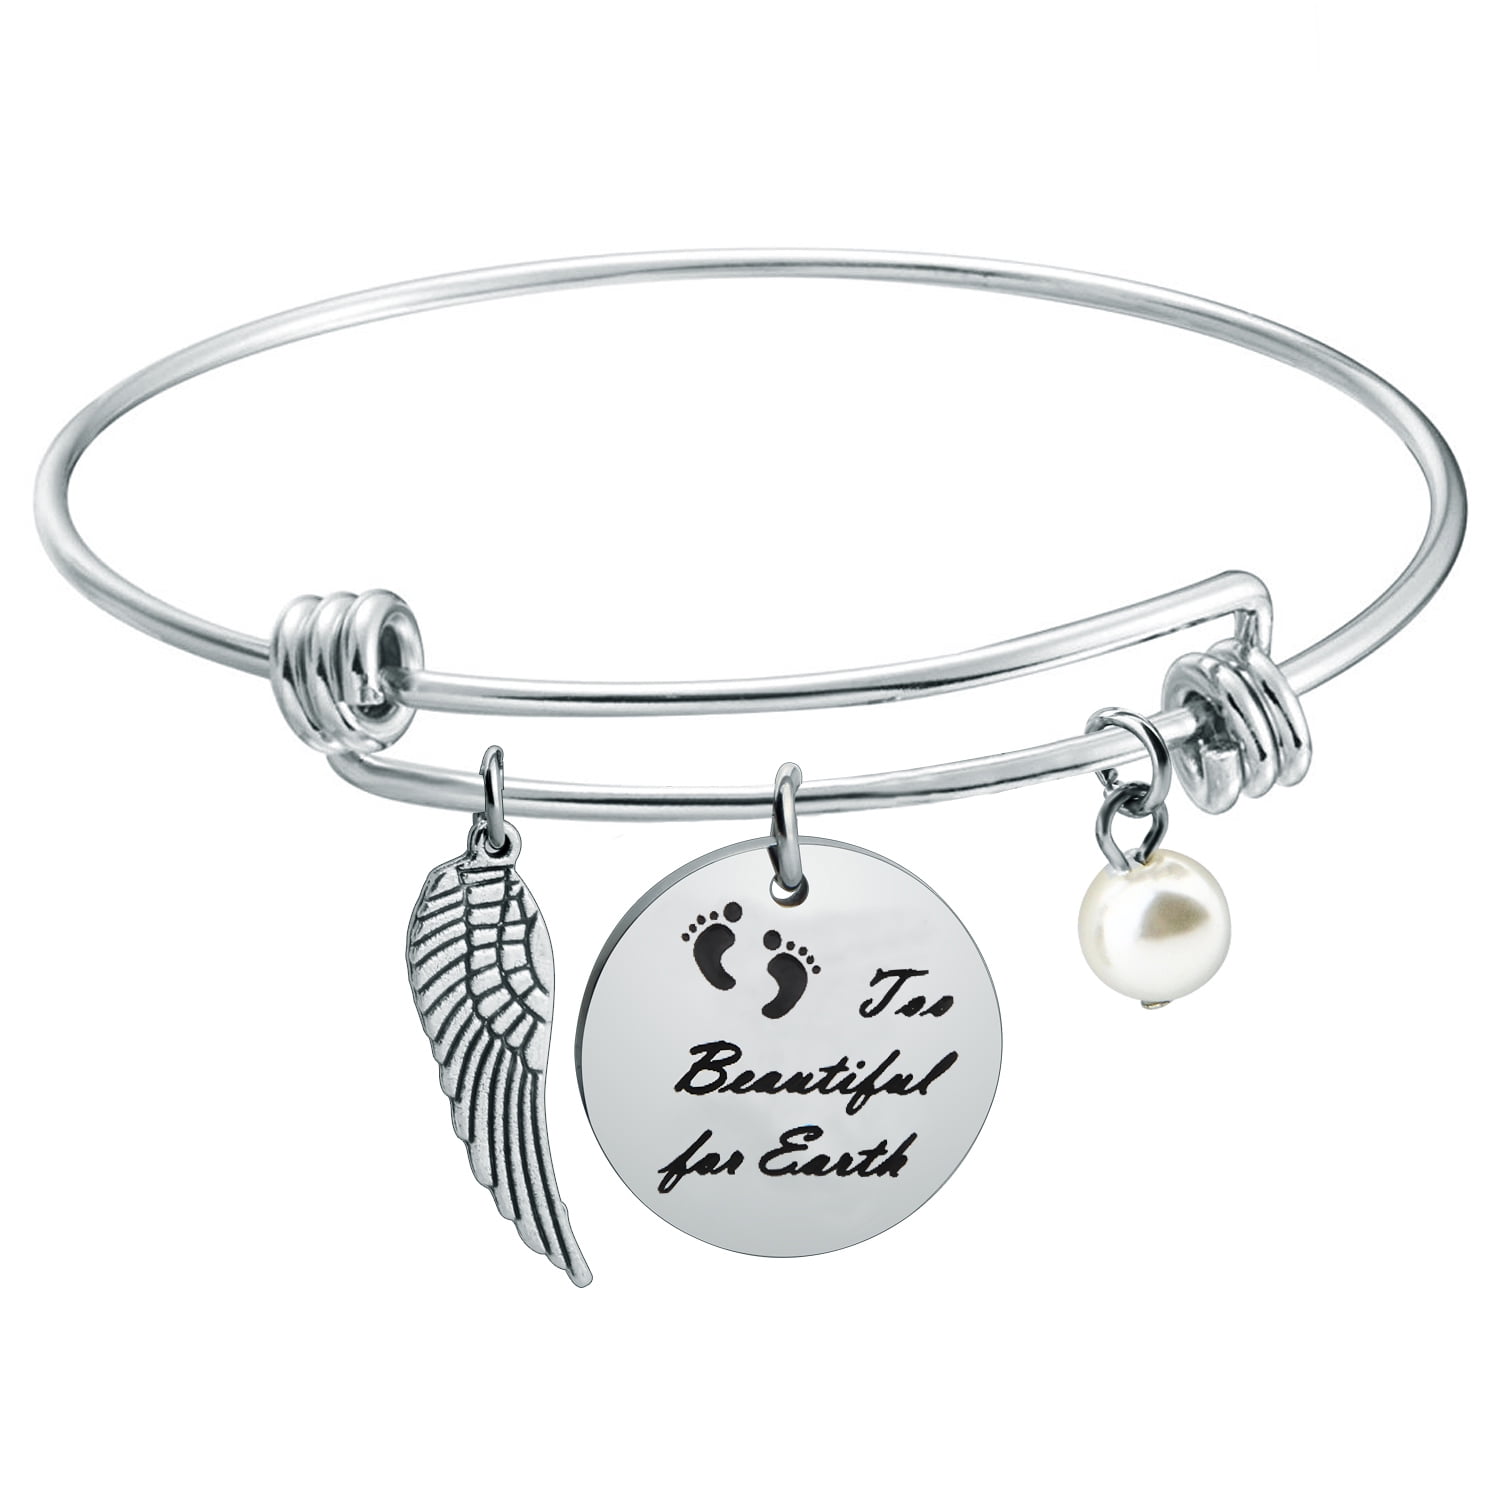 Loss Of A Baby Miscarriage Gift Until We Meet Again Bracelet Mothers Day Gift For Her Memorial Bracelet Loss Of Wife Gift For Daughter